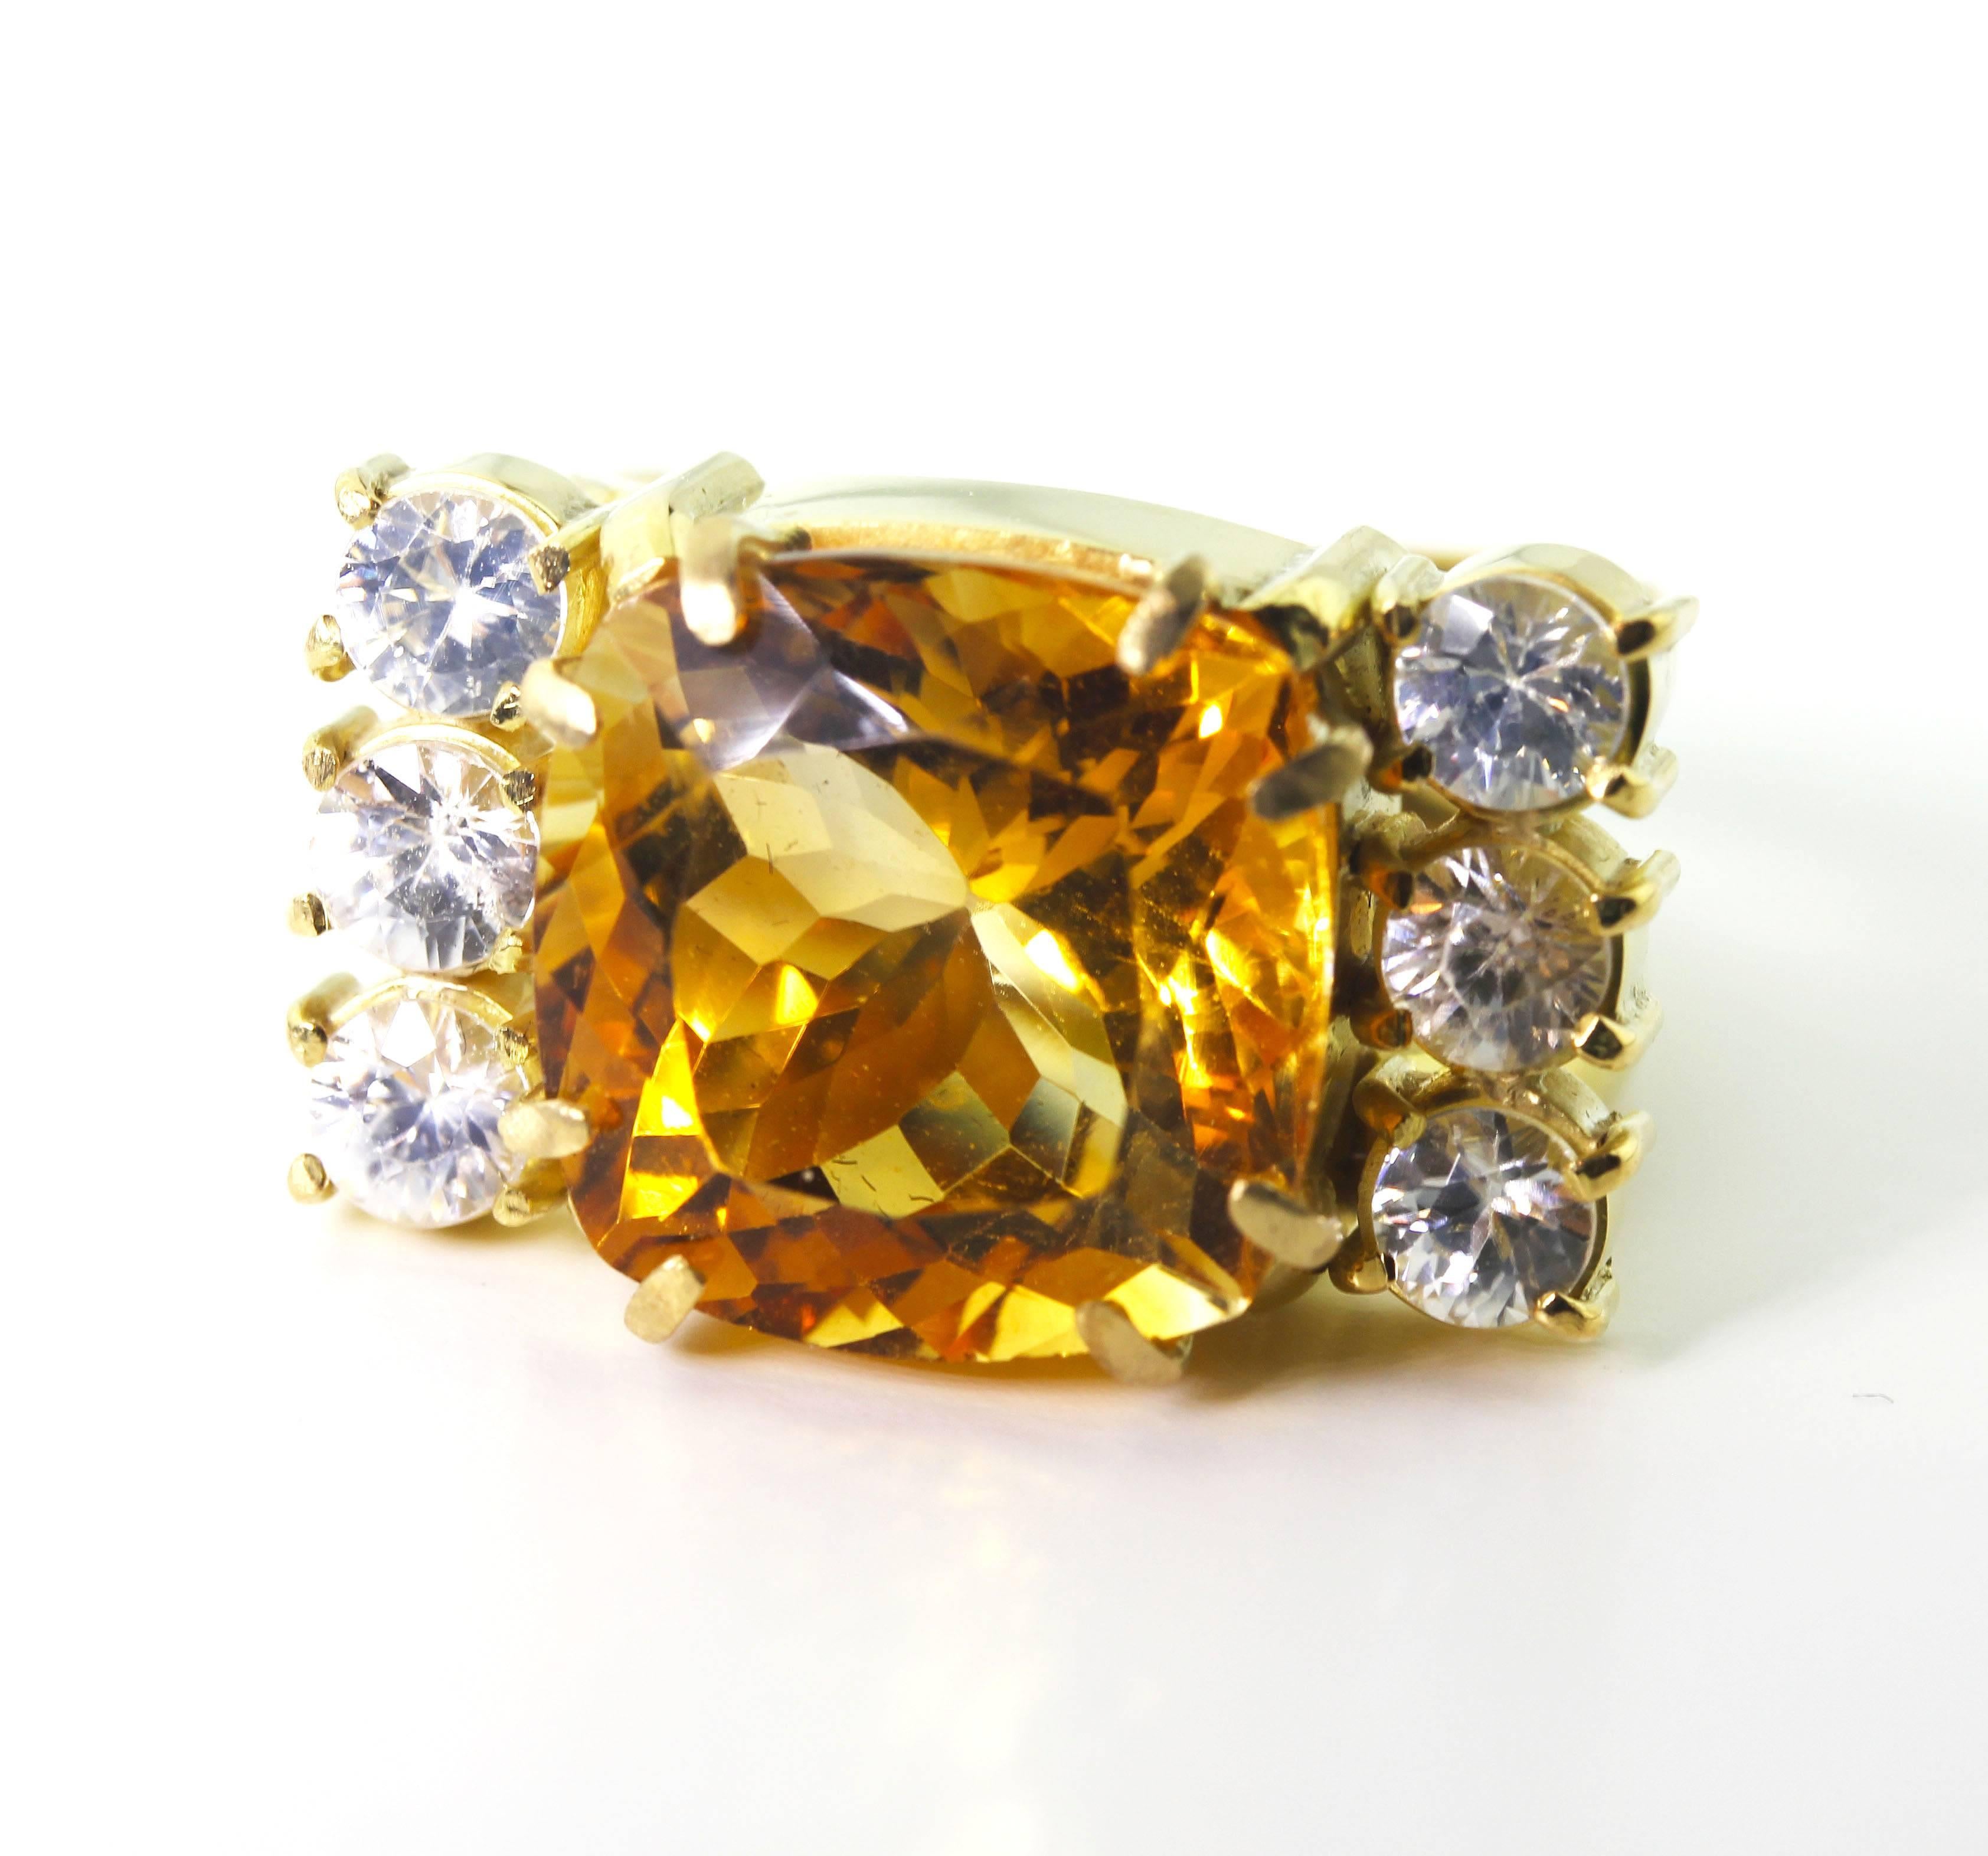 AJD Very Hollywood 11.5 Carat Golden Citrine & Sapphire 18Kt Gold Cocktail Ring For Sale 3